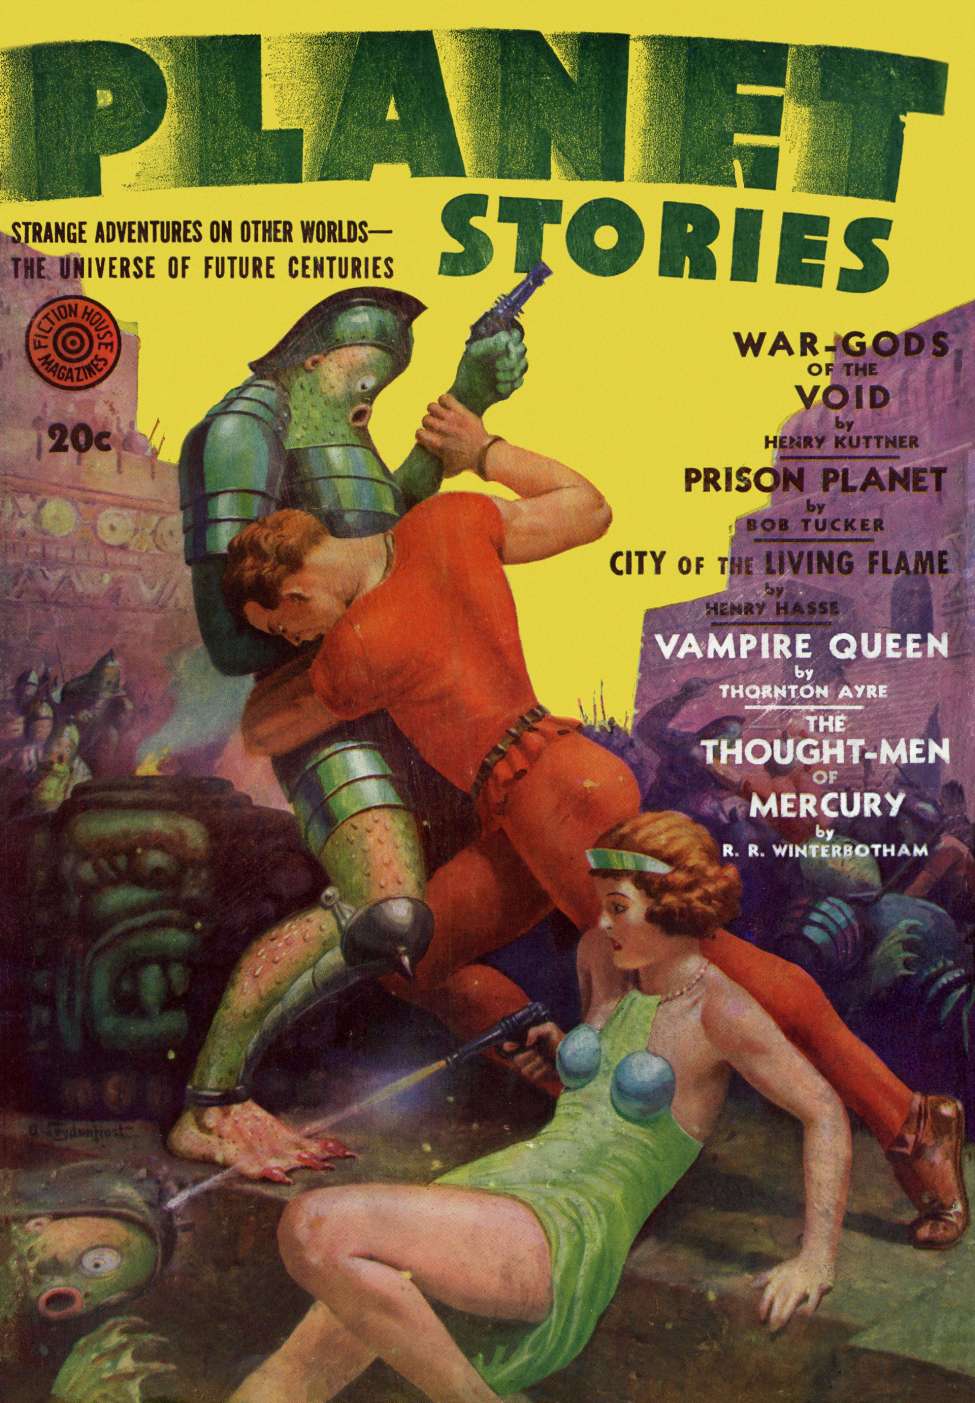 Comic Book Cover For Planet Stories v1 12 - The Thought-Men of Mercury - R. R. Winterbotham